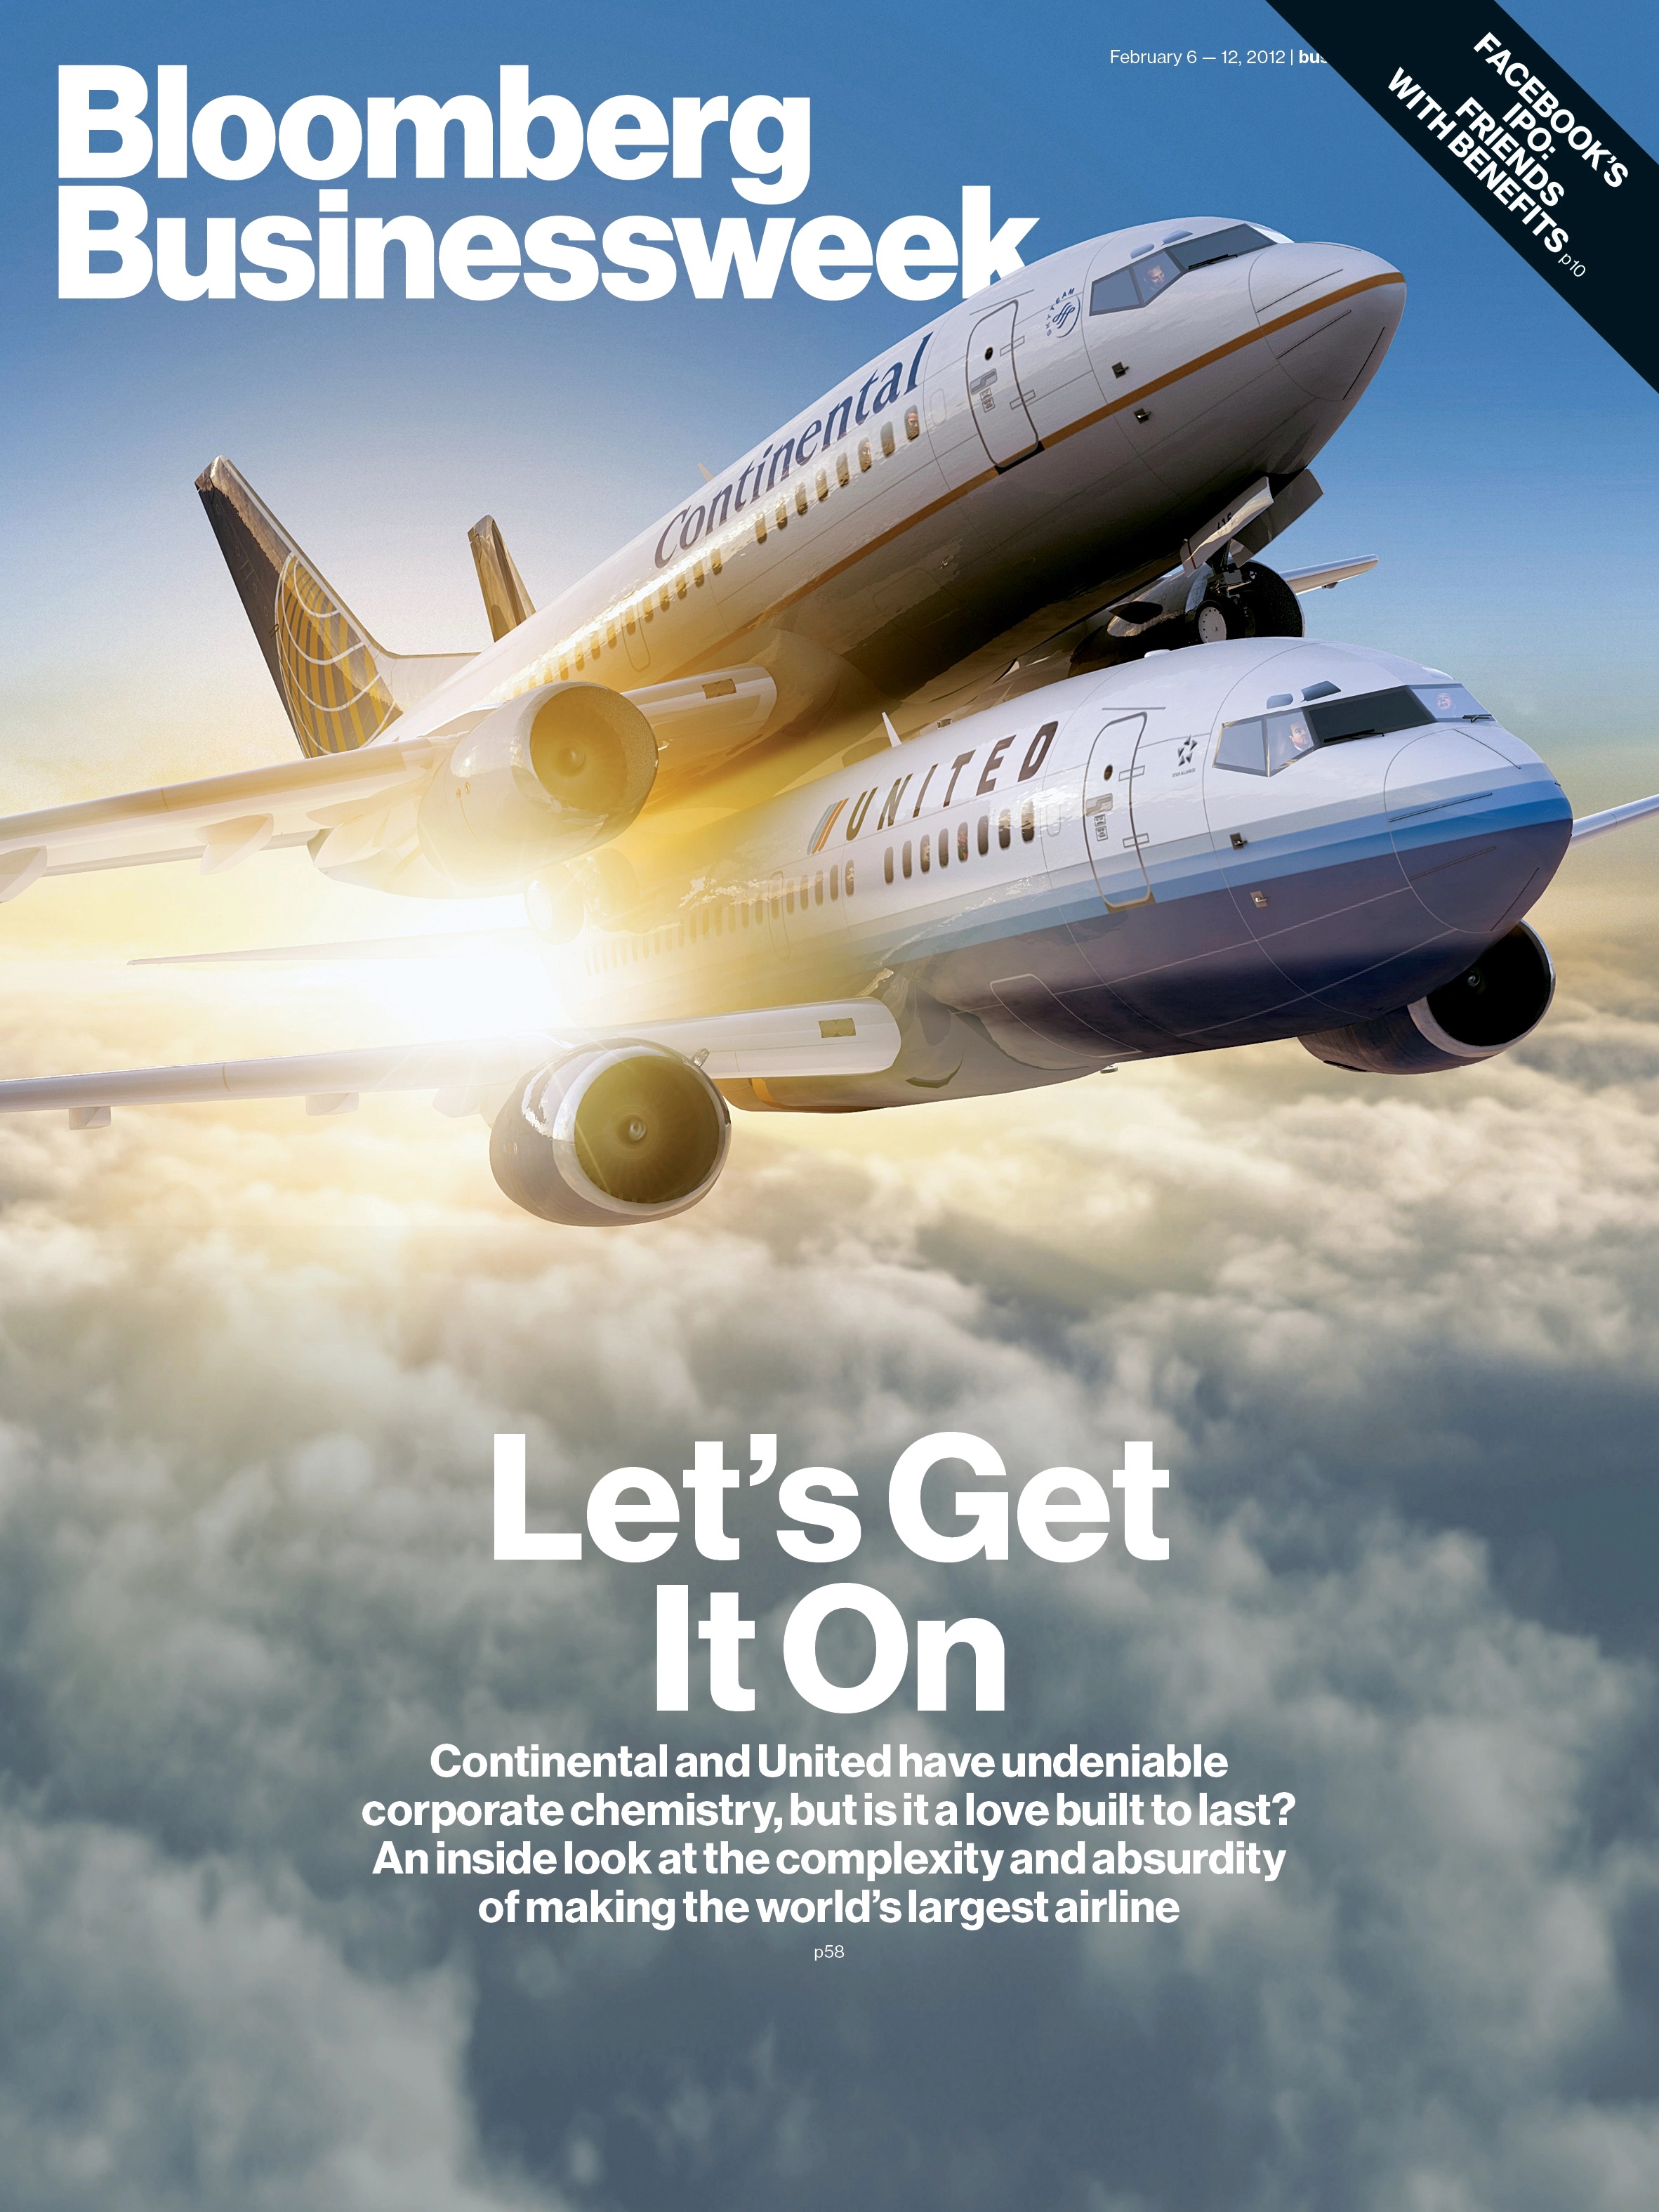 Bloomberg Businessweek-February 6-12, 2012: "Let's Get It On"